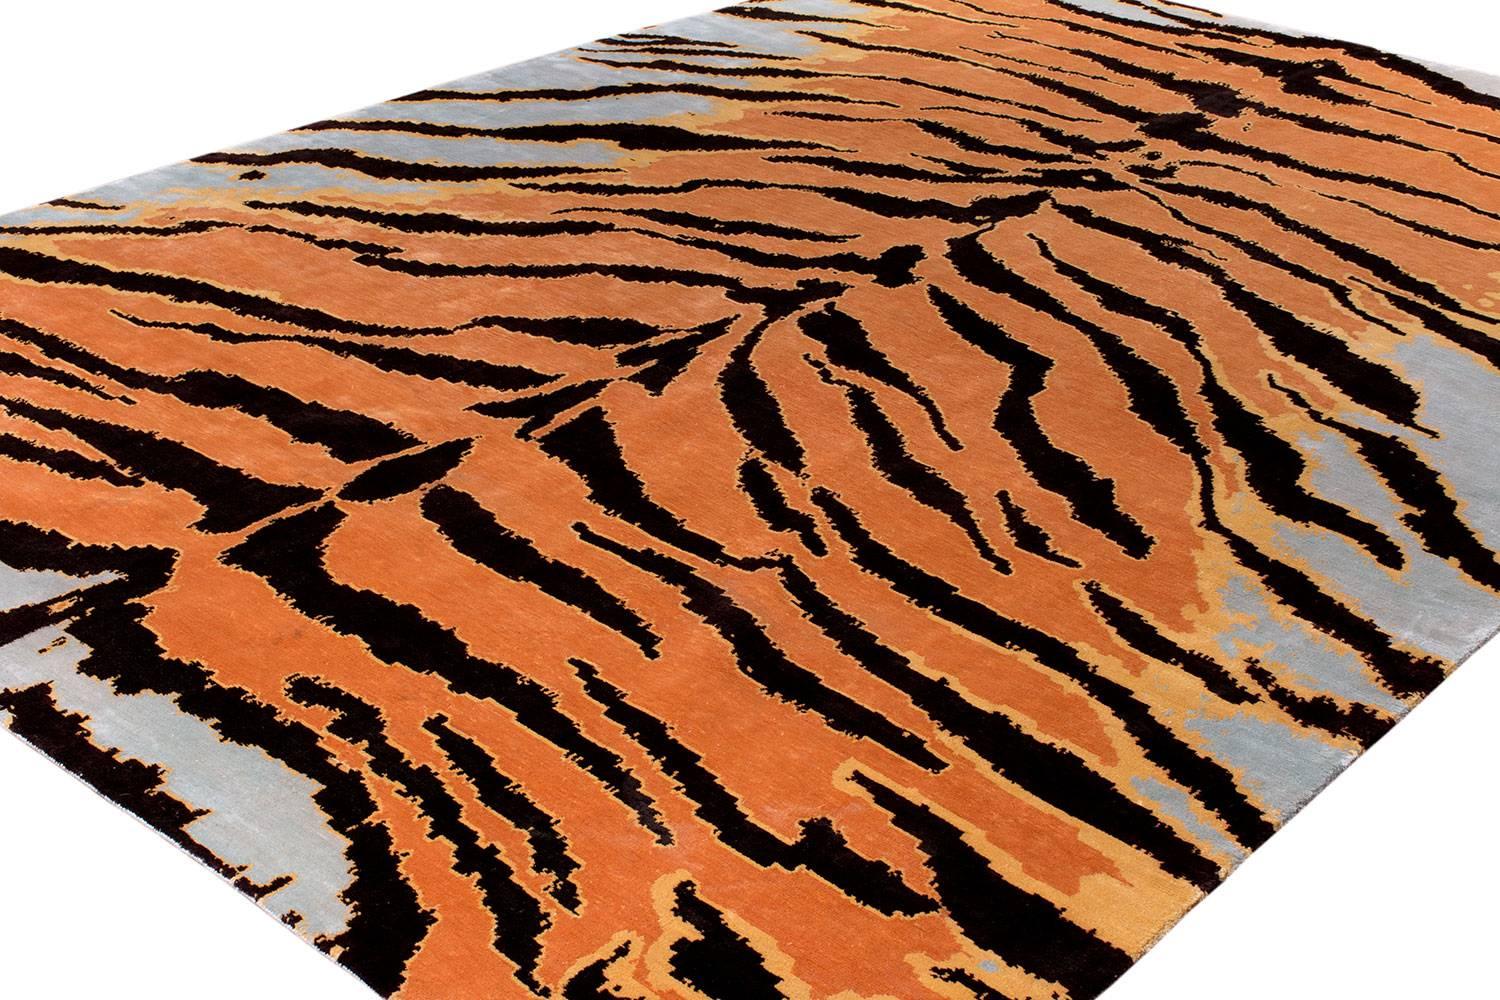 9x12 hand-knotted carpet in silk, made with vegetable dyes. Tiger is a Joseph Carini Carpets signature that has been translated into countless color-ways. Our take on the traditional animal print gives it a fresh, unconventional appeal. Original